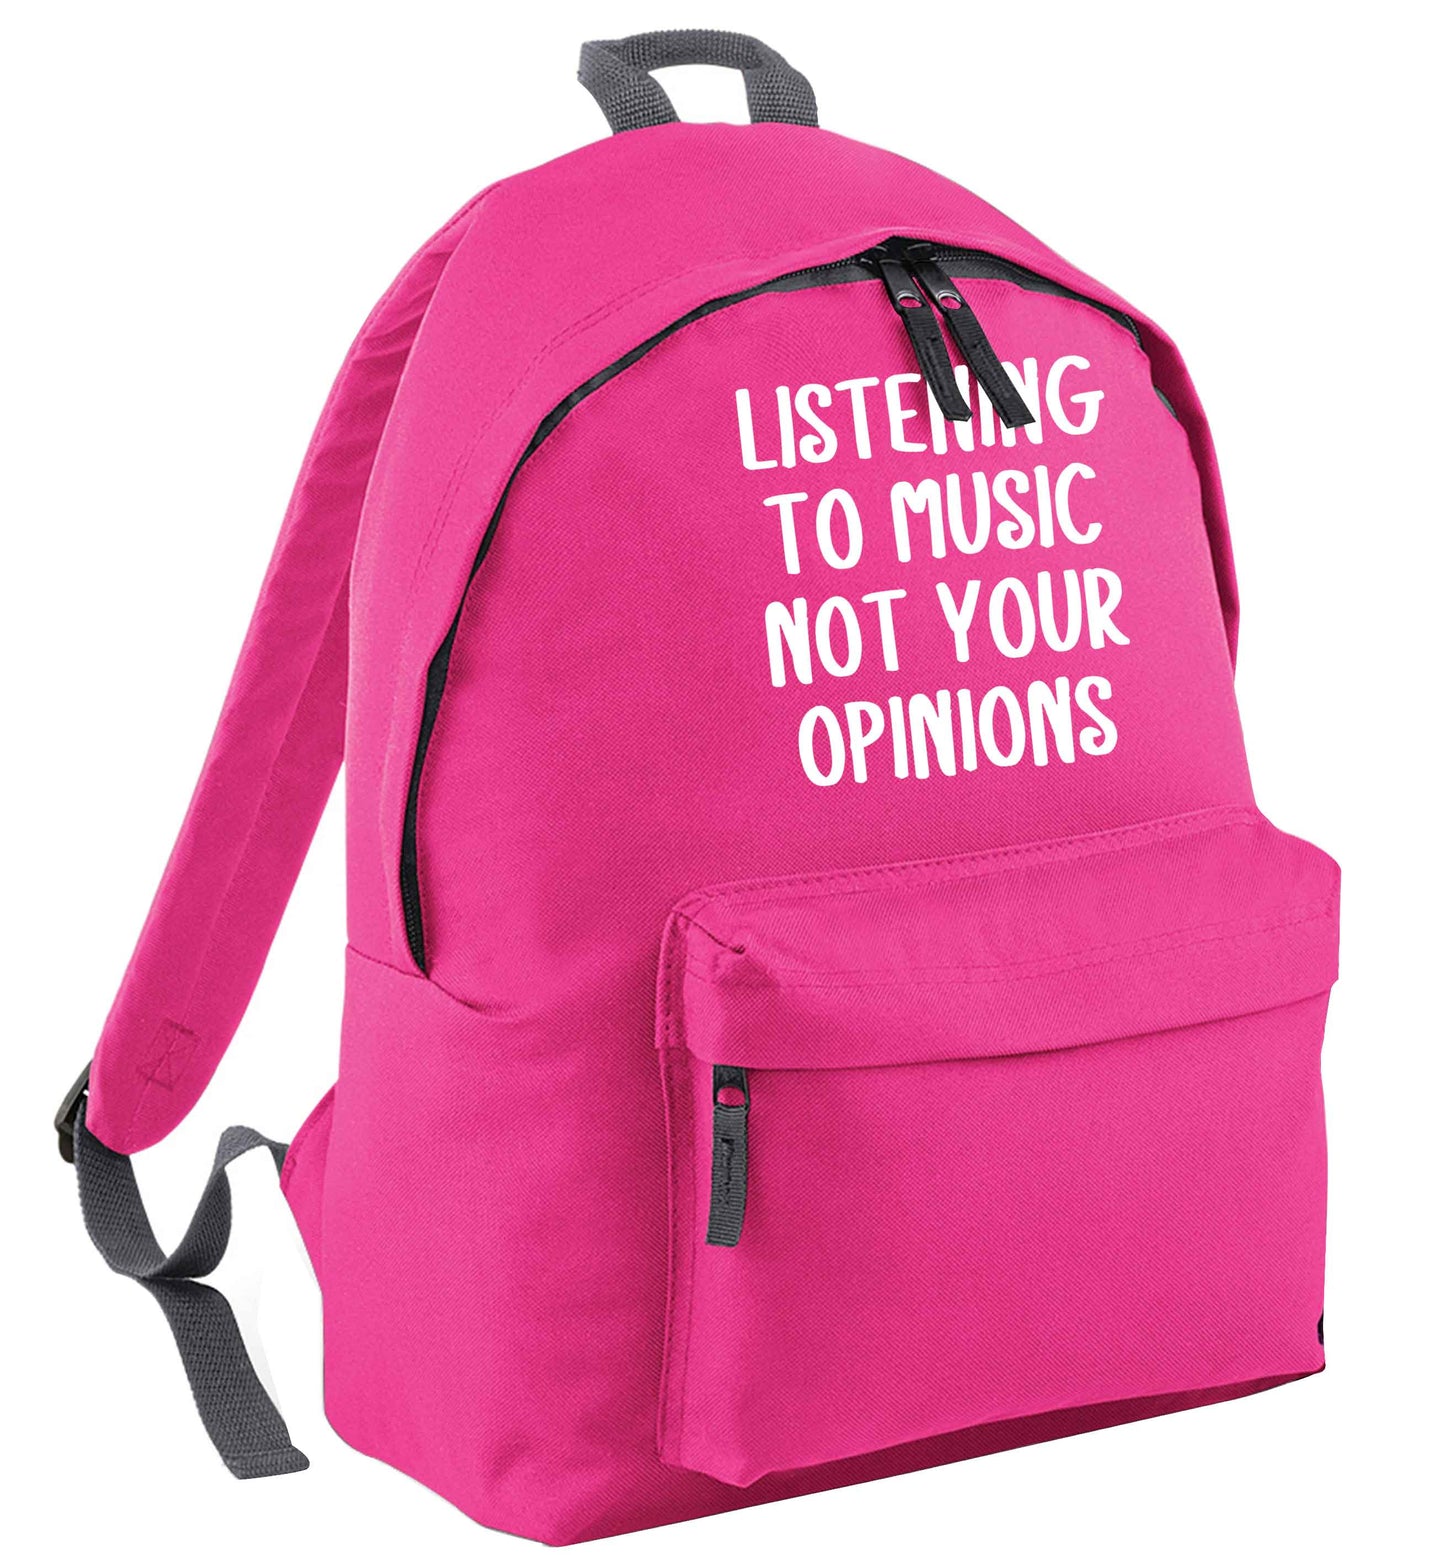 Listening to music not your opinions pink adults backpack